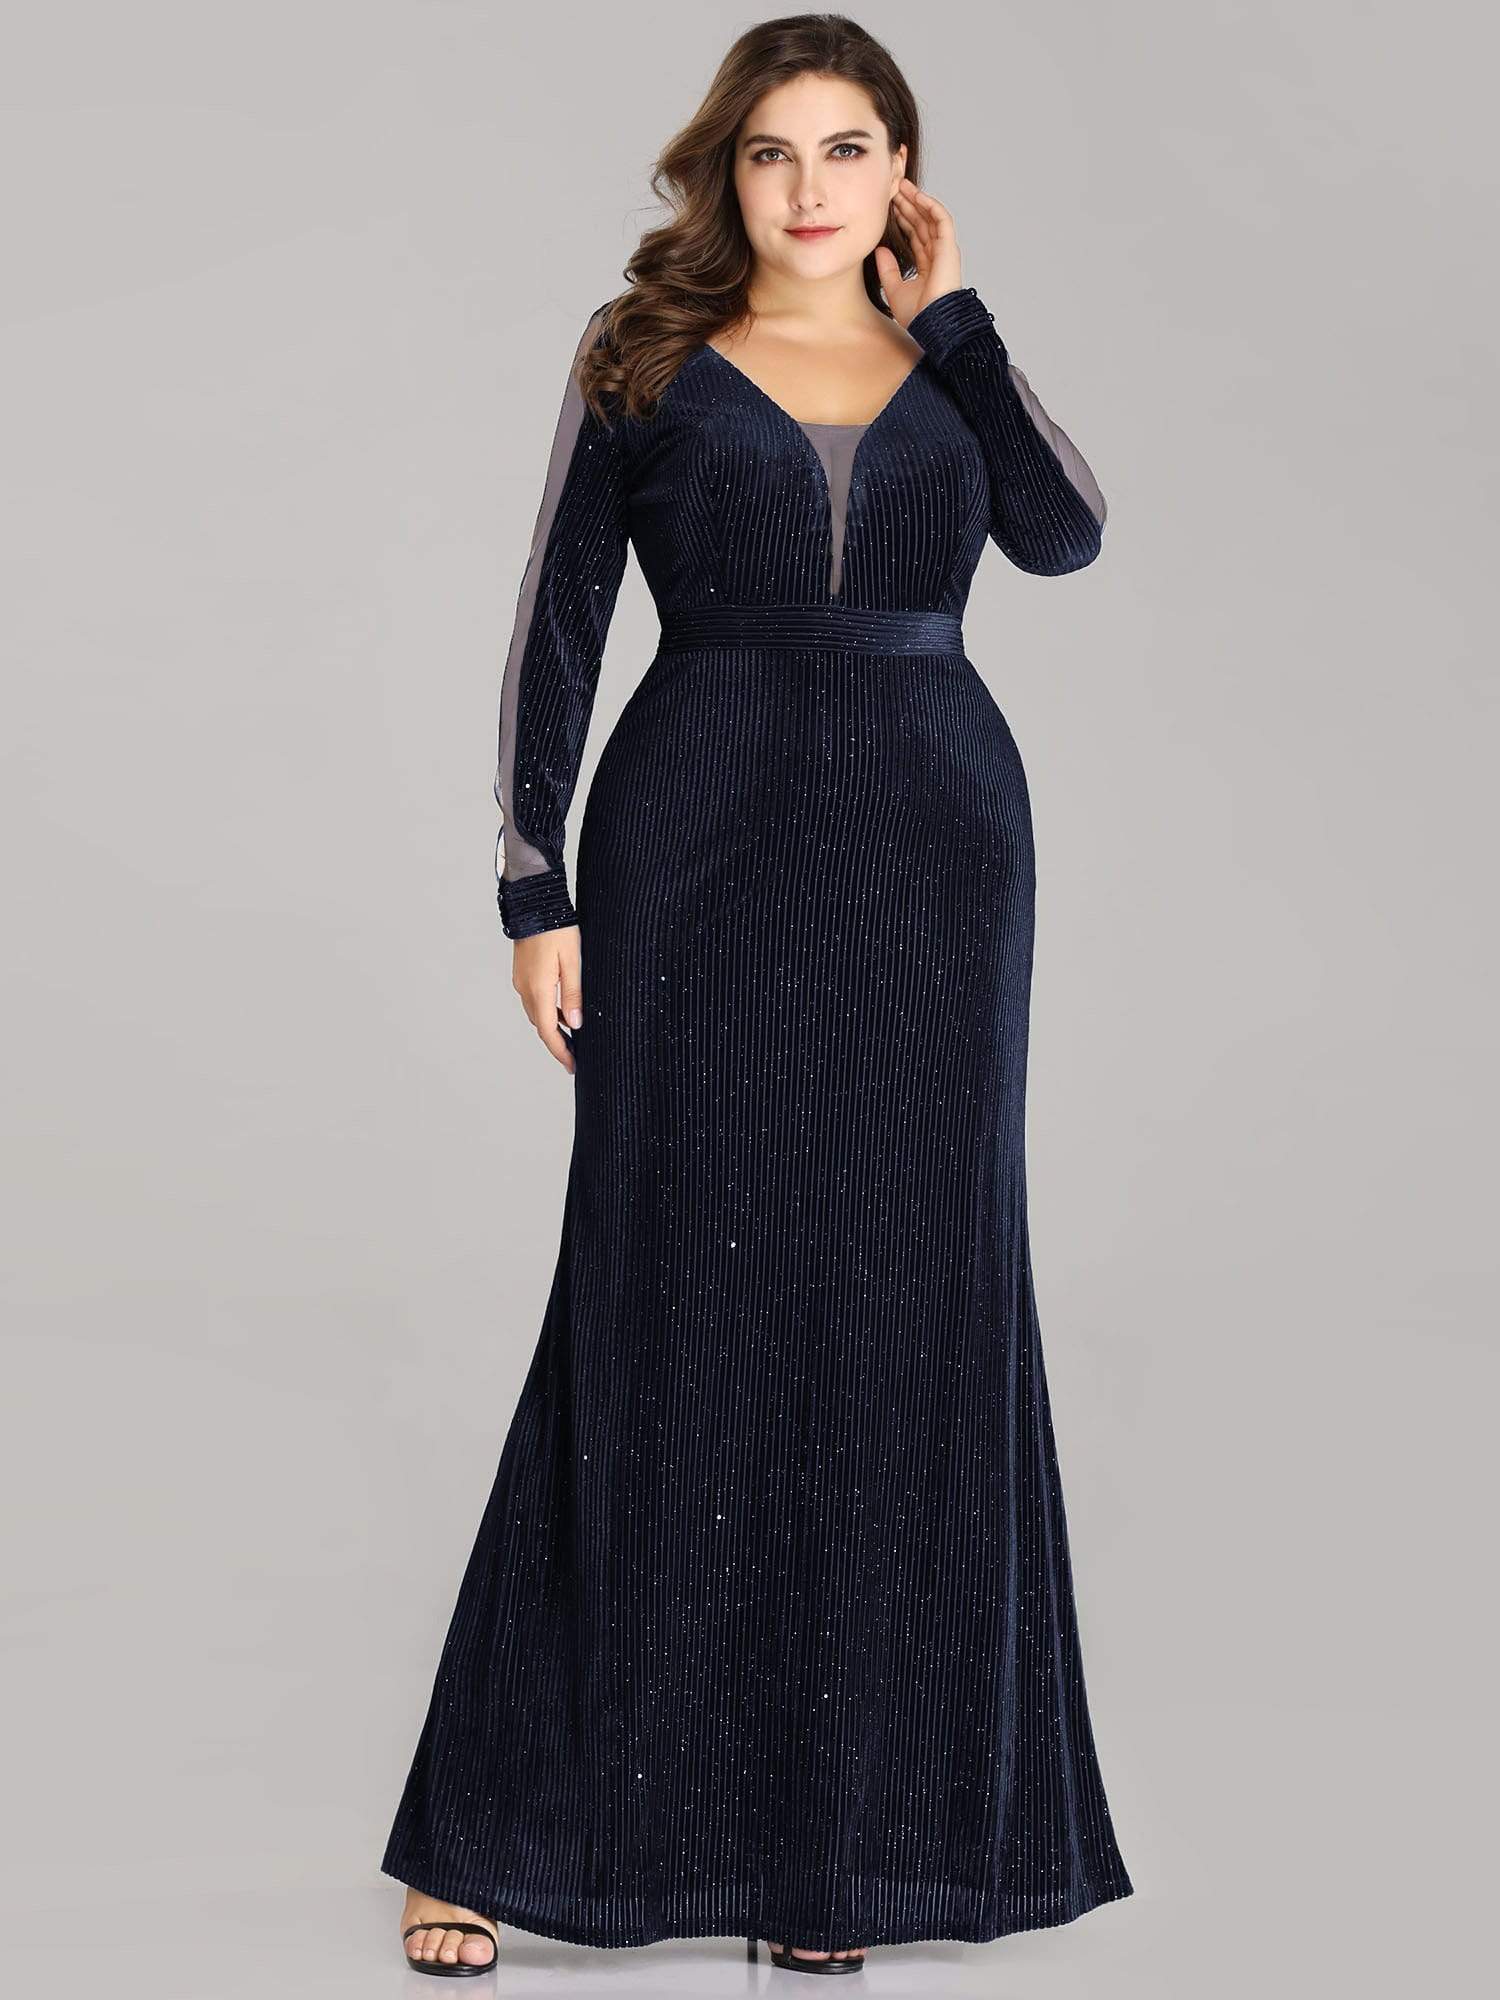 COLOR=Navy Blue | Shimmery Evening Dress With Long Sleeves-Navy Blue 5